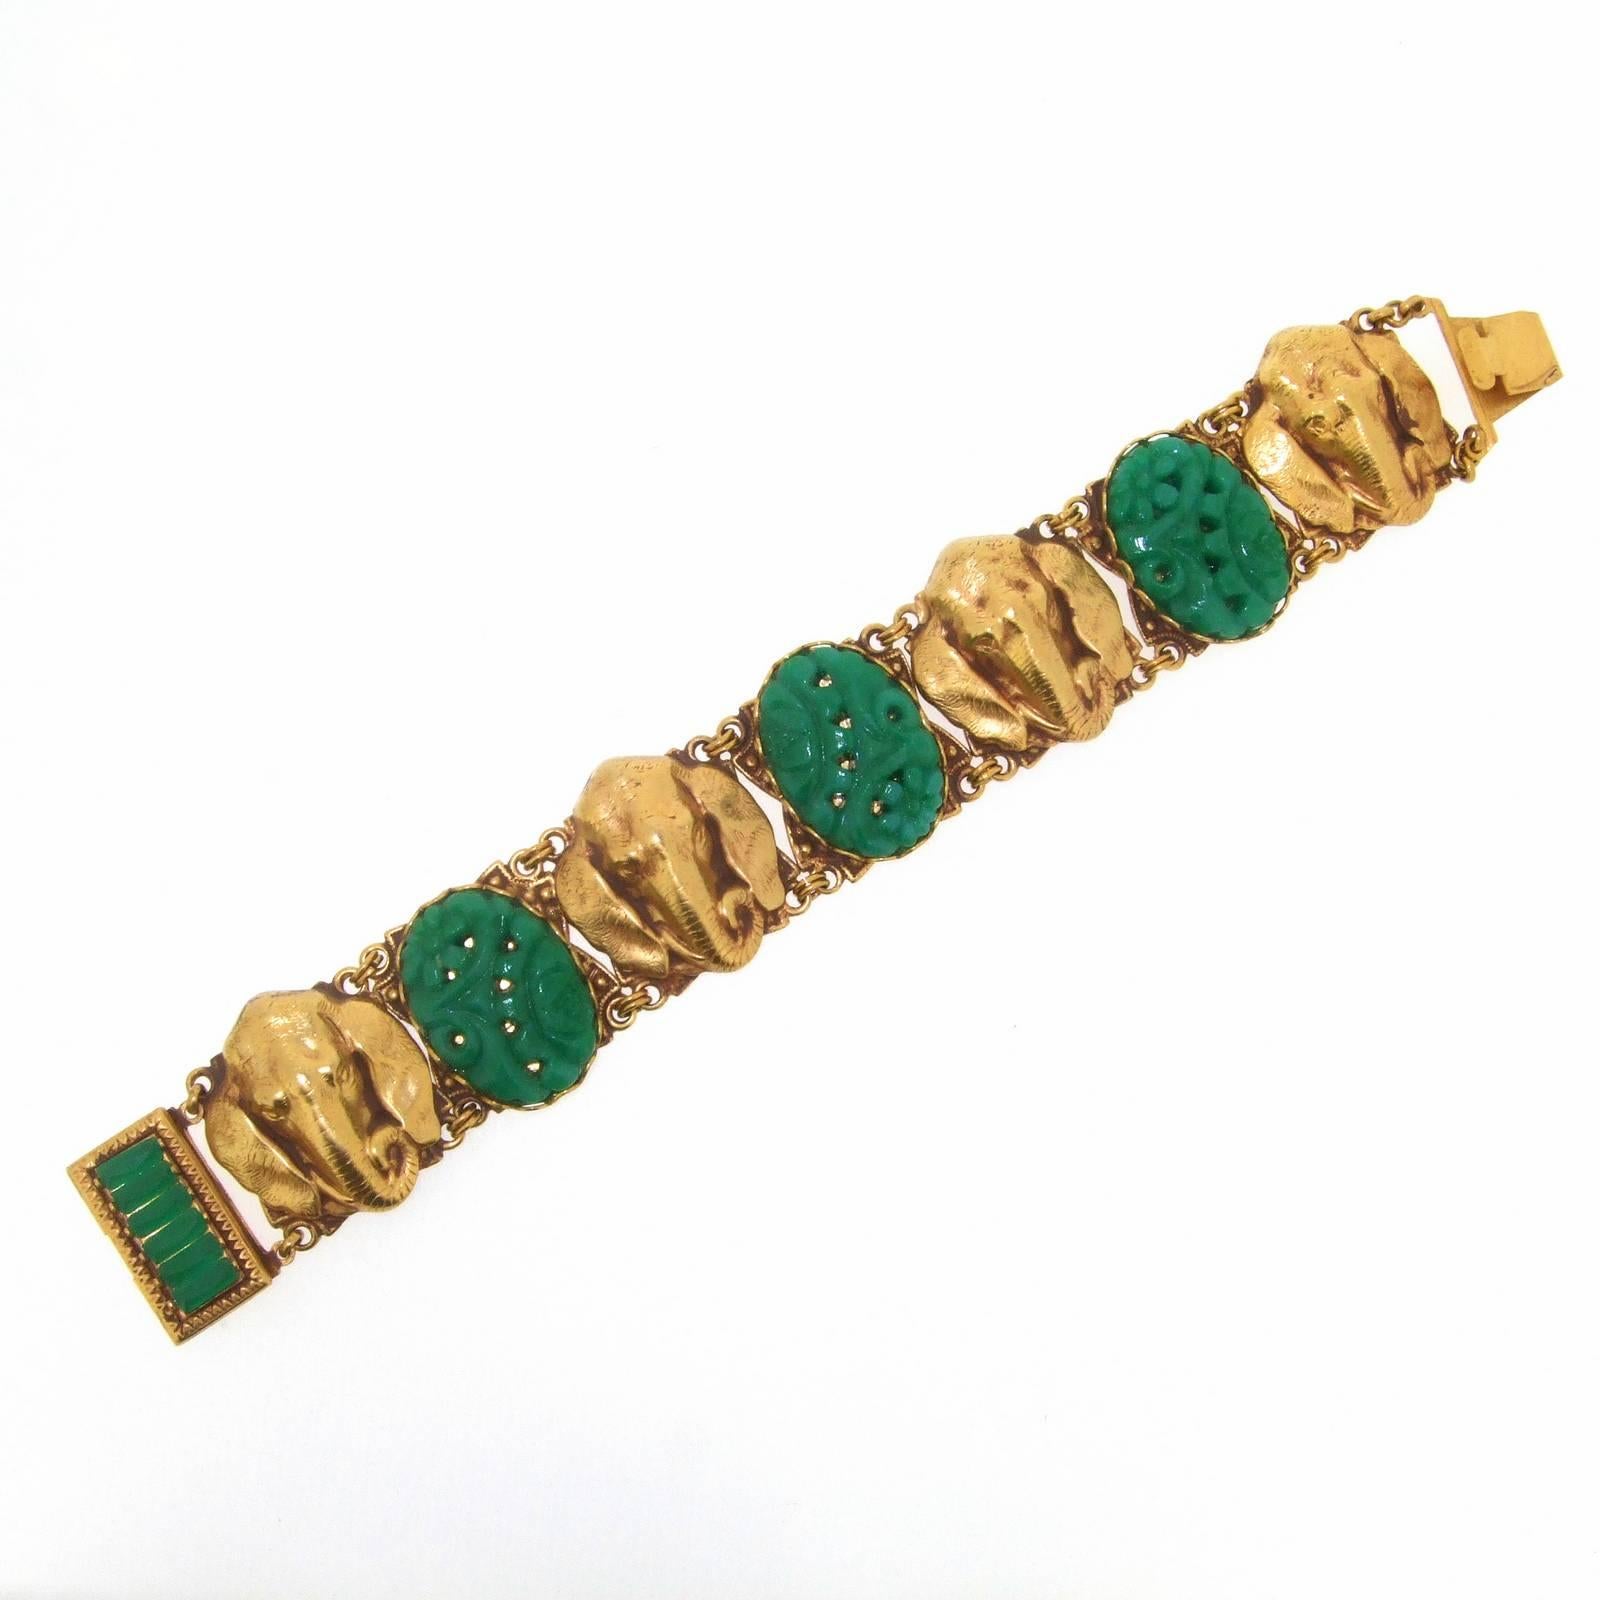 A new gold plated bracelet by Askew London set with gold elephant faces and jade effect vintage glass. 

It measures: 7 1/2 inches long/ 18.2cm by 2.5cm deep. Stamped Askew London inside.